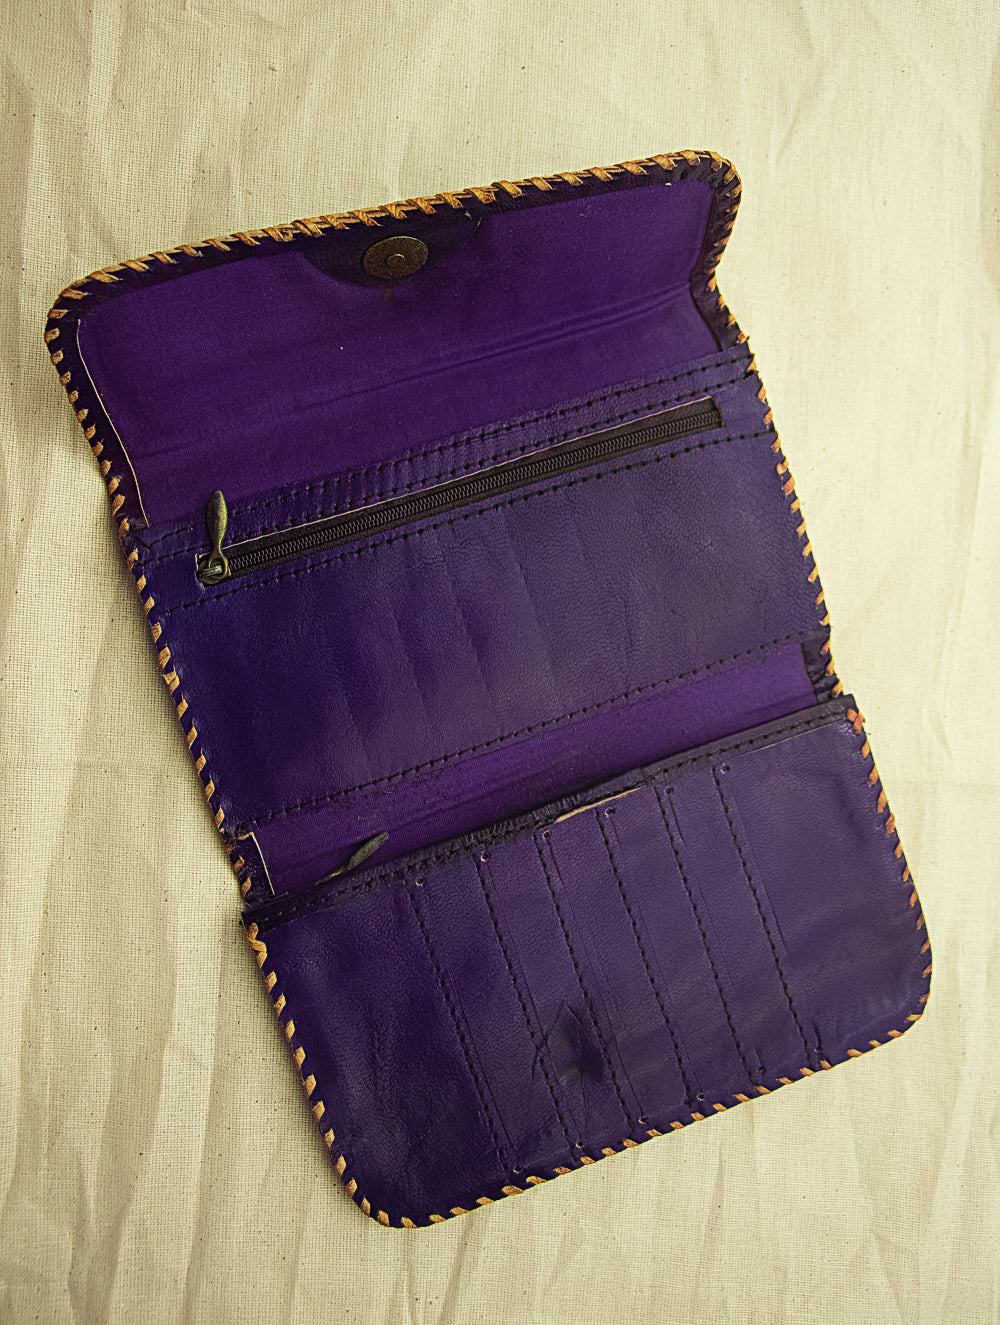 Load image into Gallery viewer, Handcrafted Leather Clutch / Wallet with Hand Stitch Detail - The India Craft House 